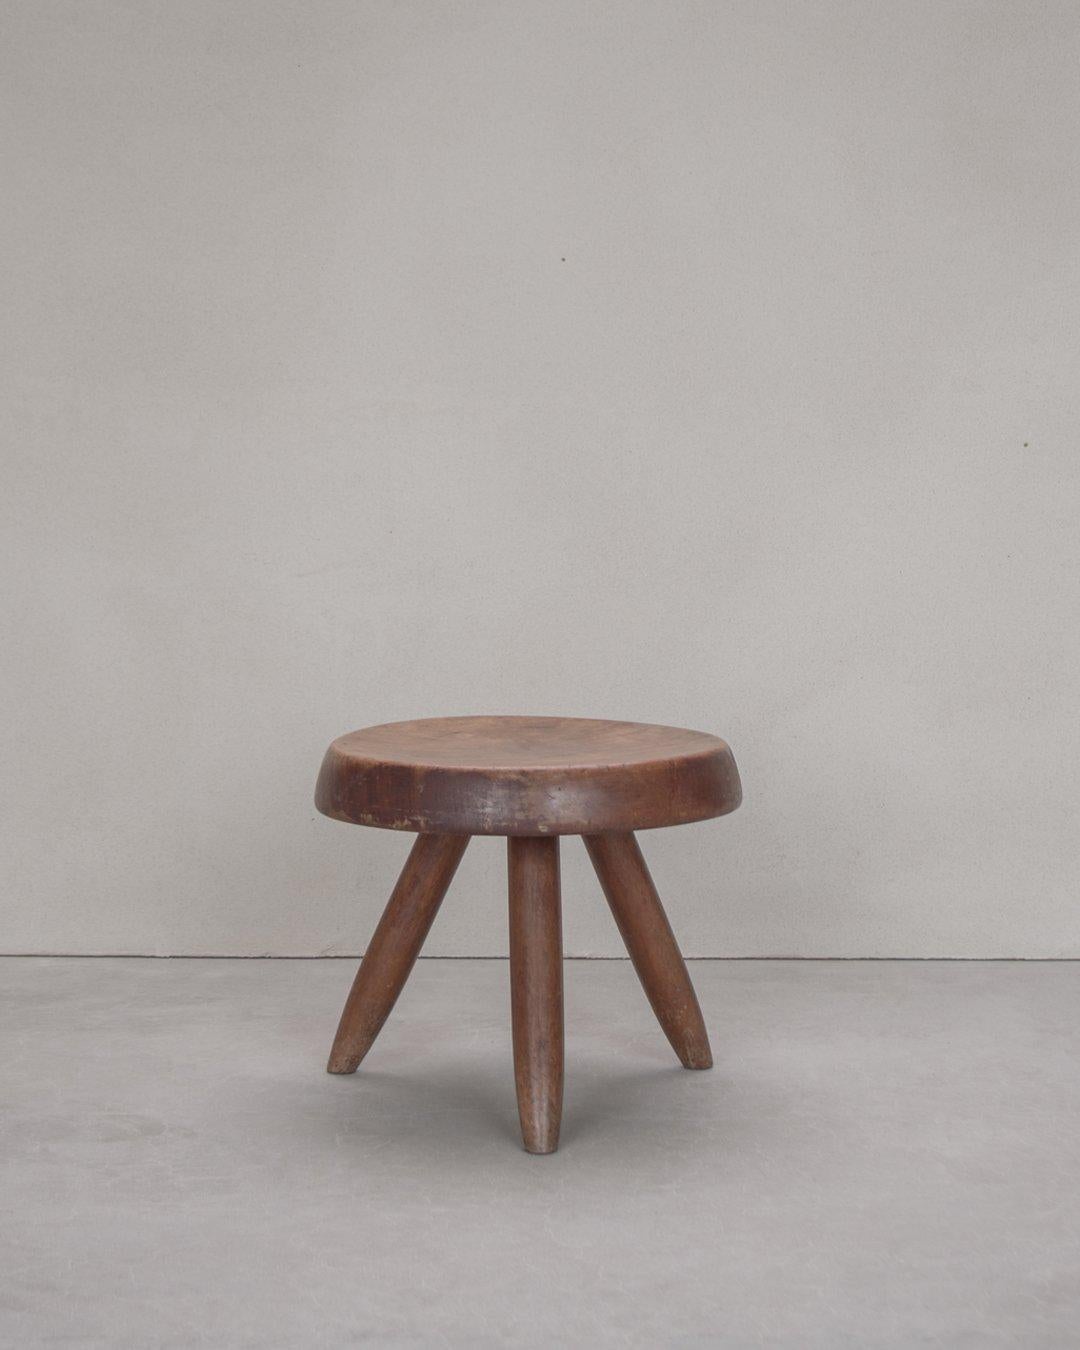 Charlotte Perriand, Vintage Berger Stool, circa 1950s, Mahogany In Good Condition For Sale In Hasselt, VLI